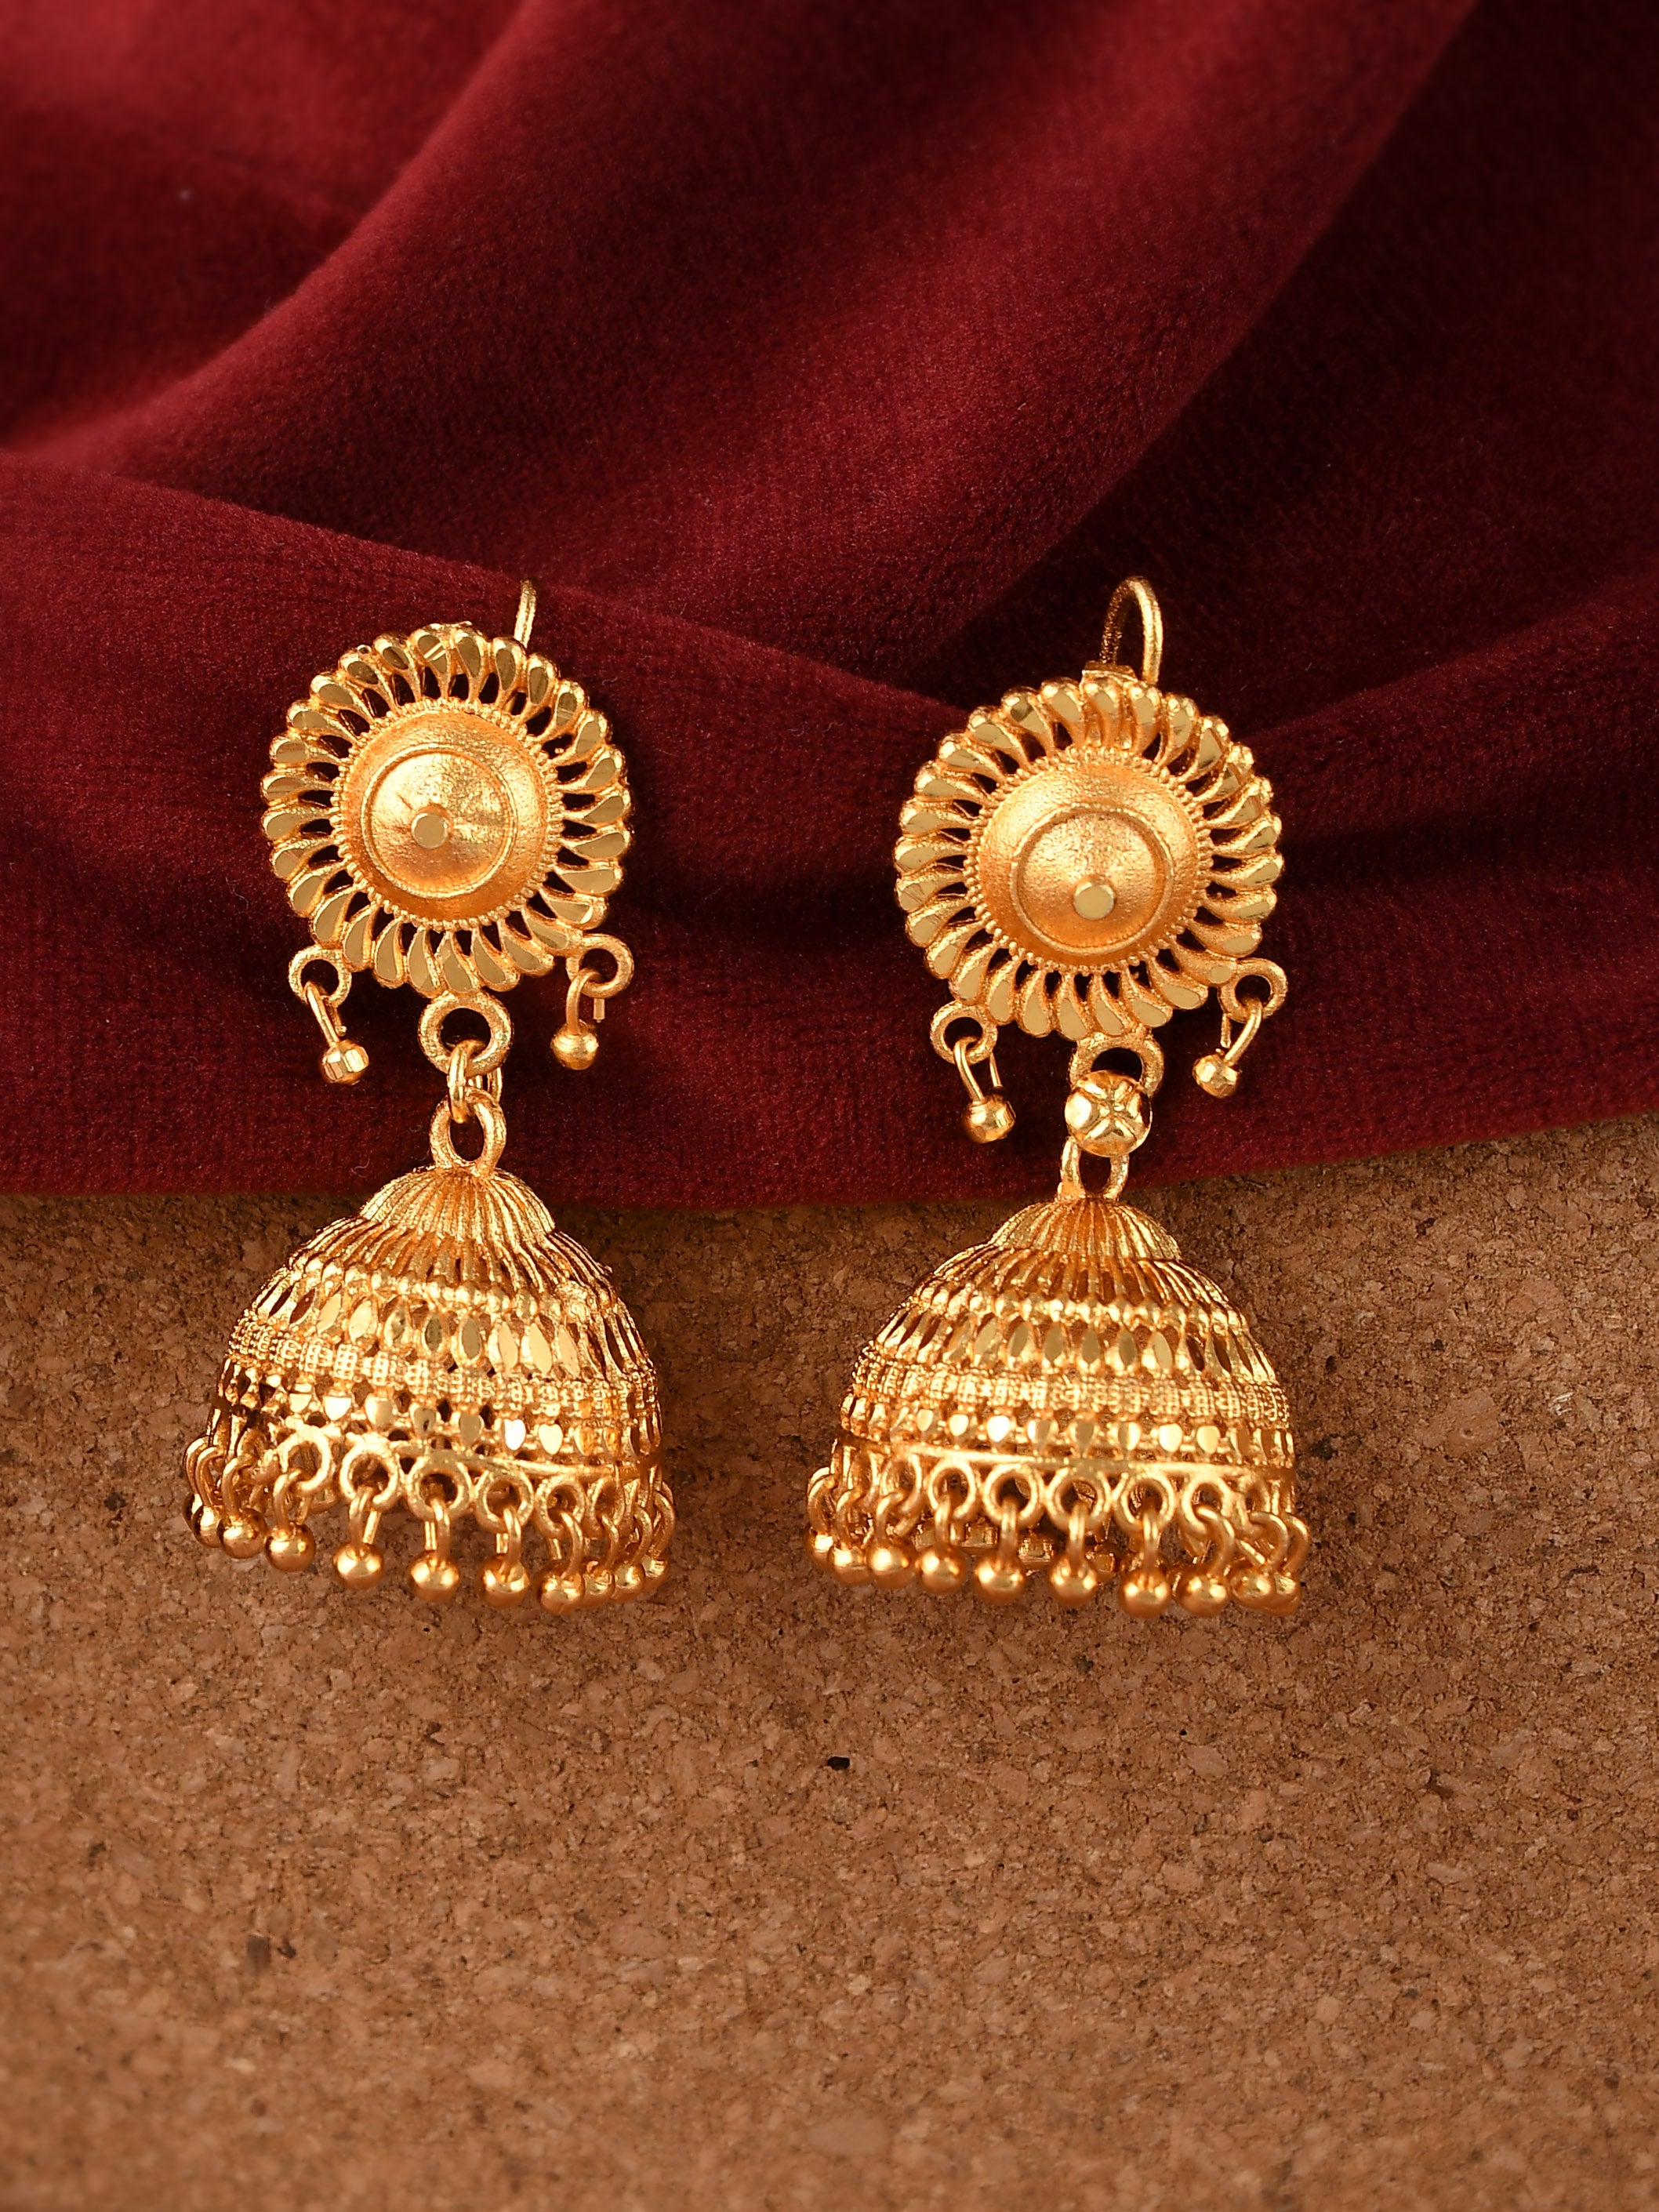 Antique And Temple Gold Jhumka Designs With Weight || Shridhi Vlog -  YouTube | Jhumka designs, Temple jewellery jhumkas, Latest gold ring designs